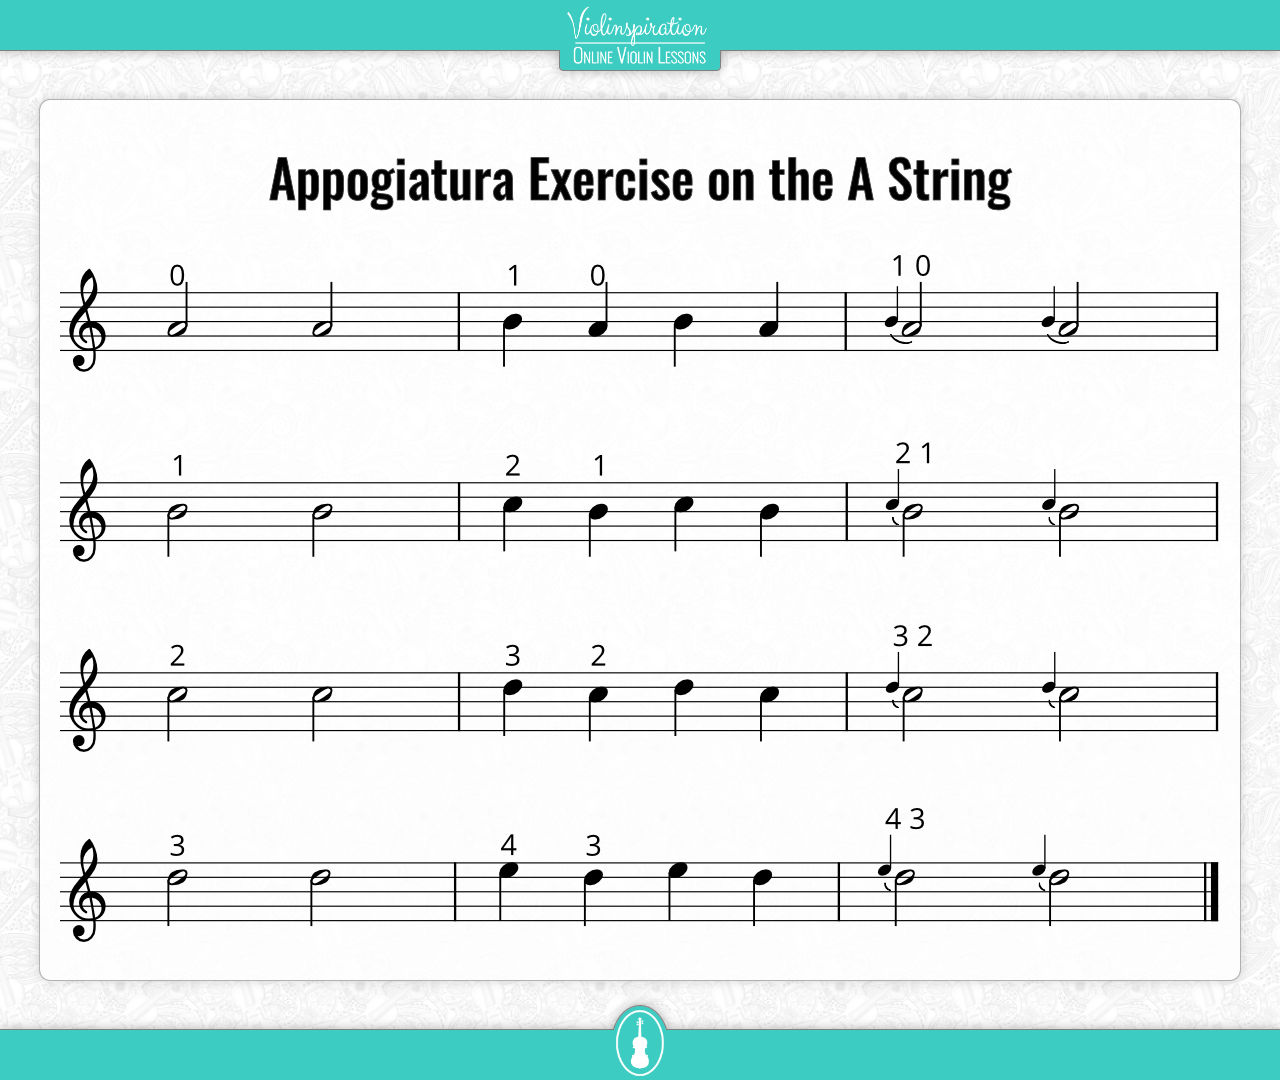 Appogiatura - Exercise on the A String